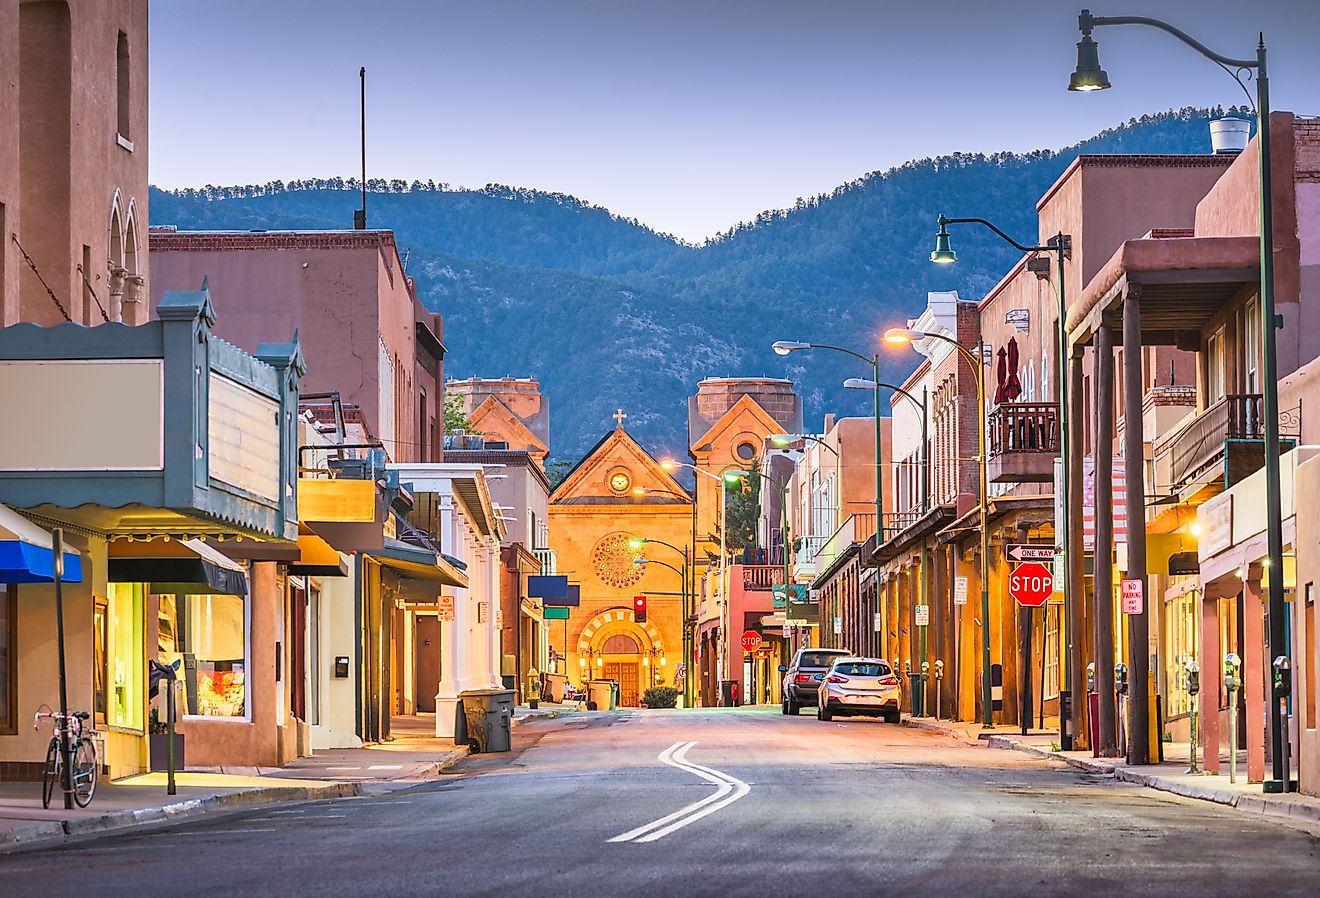 Downtown street view of Santa Fe, New Mexico.